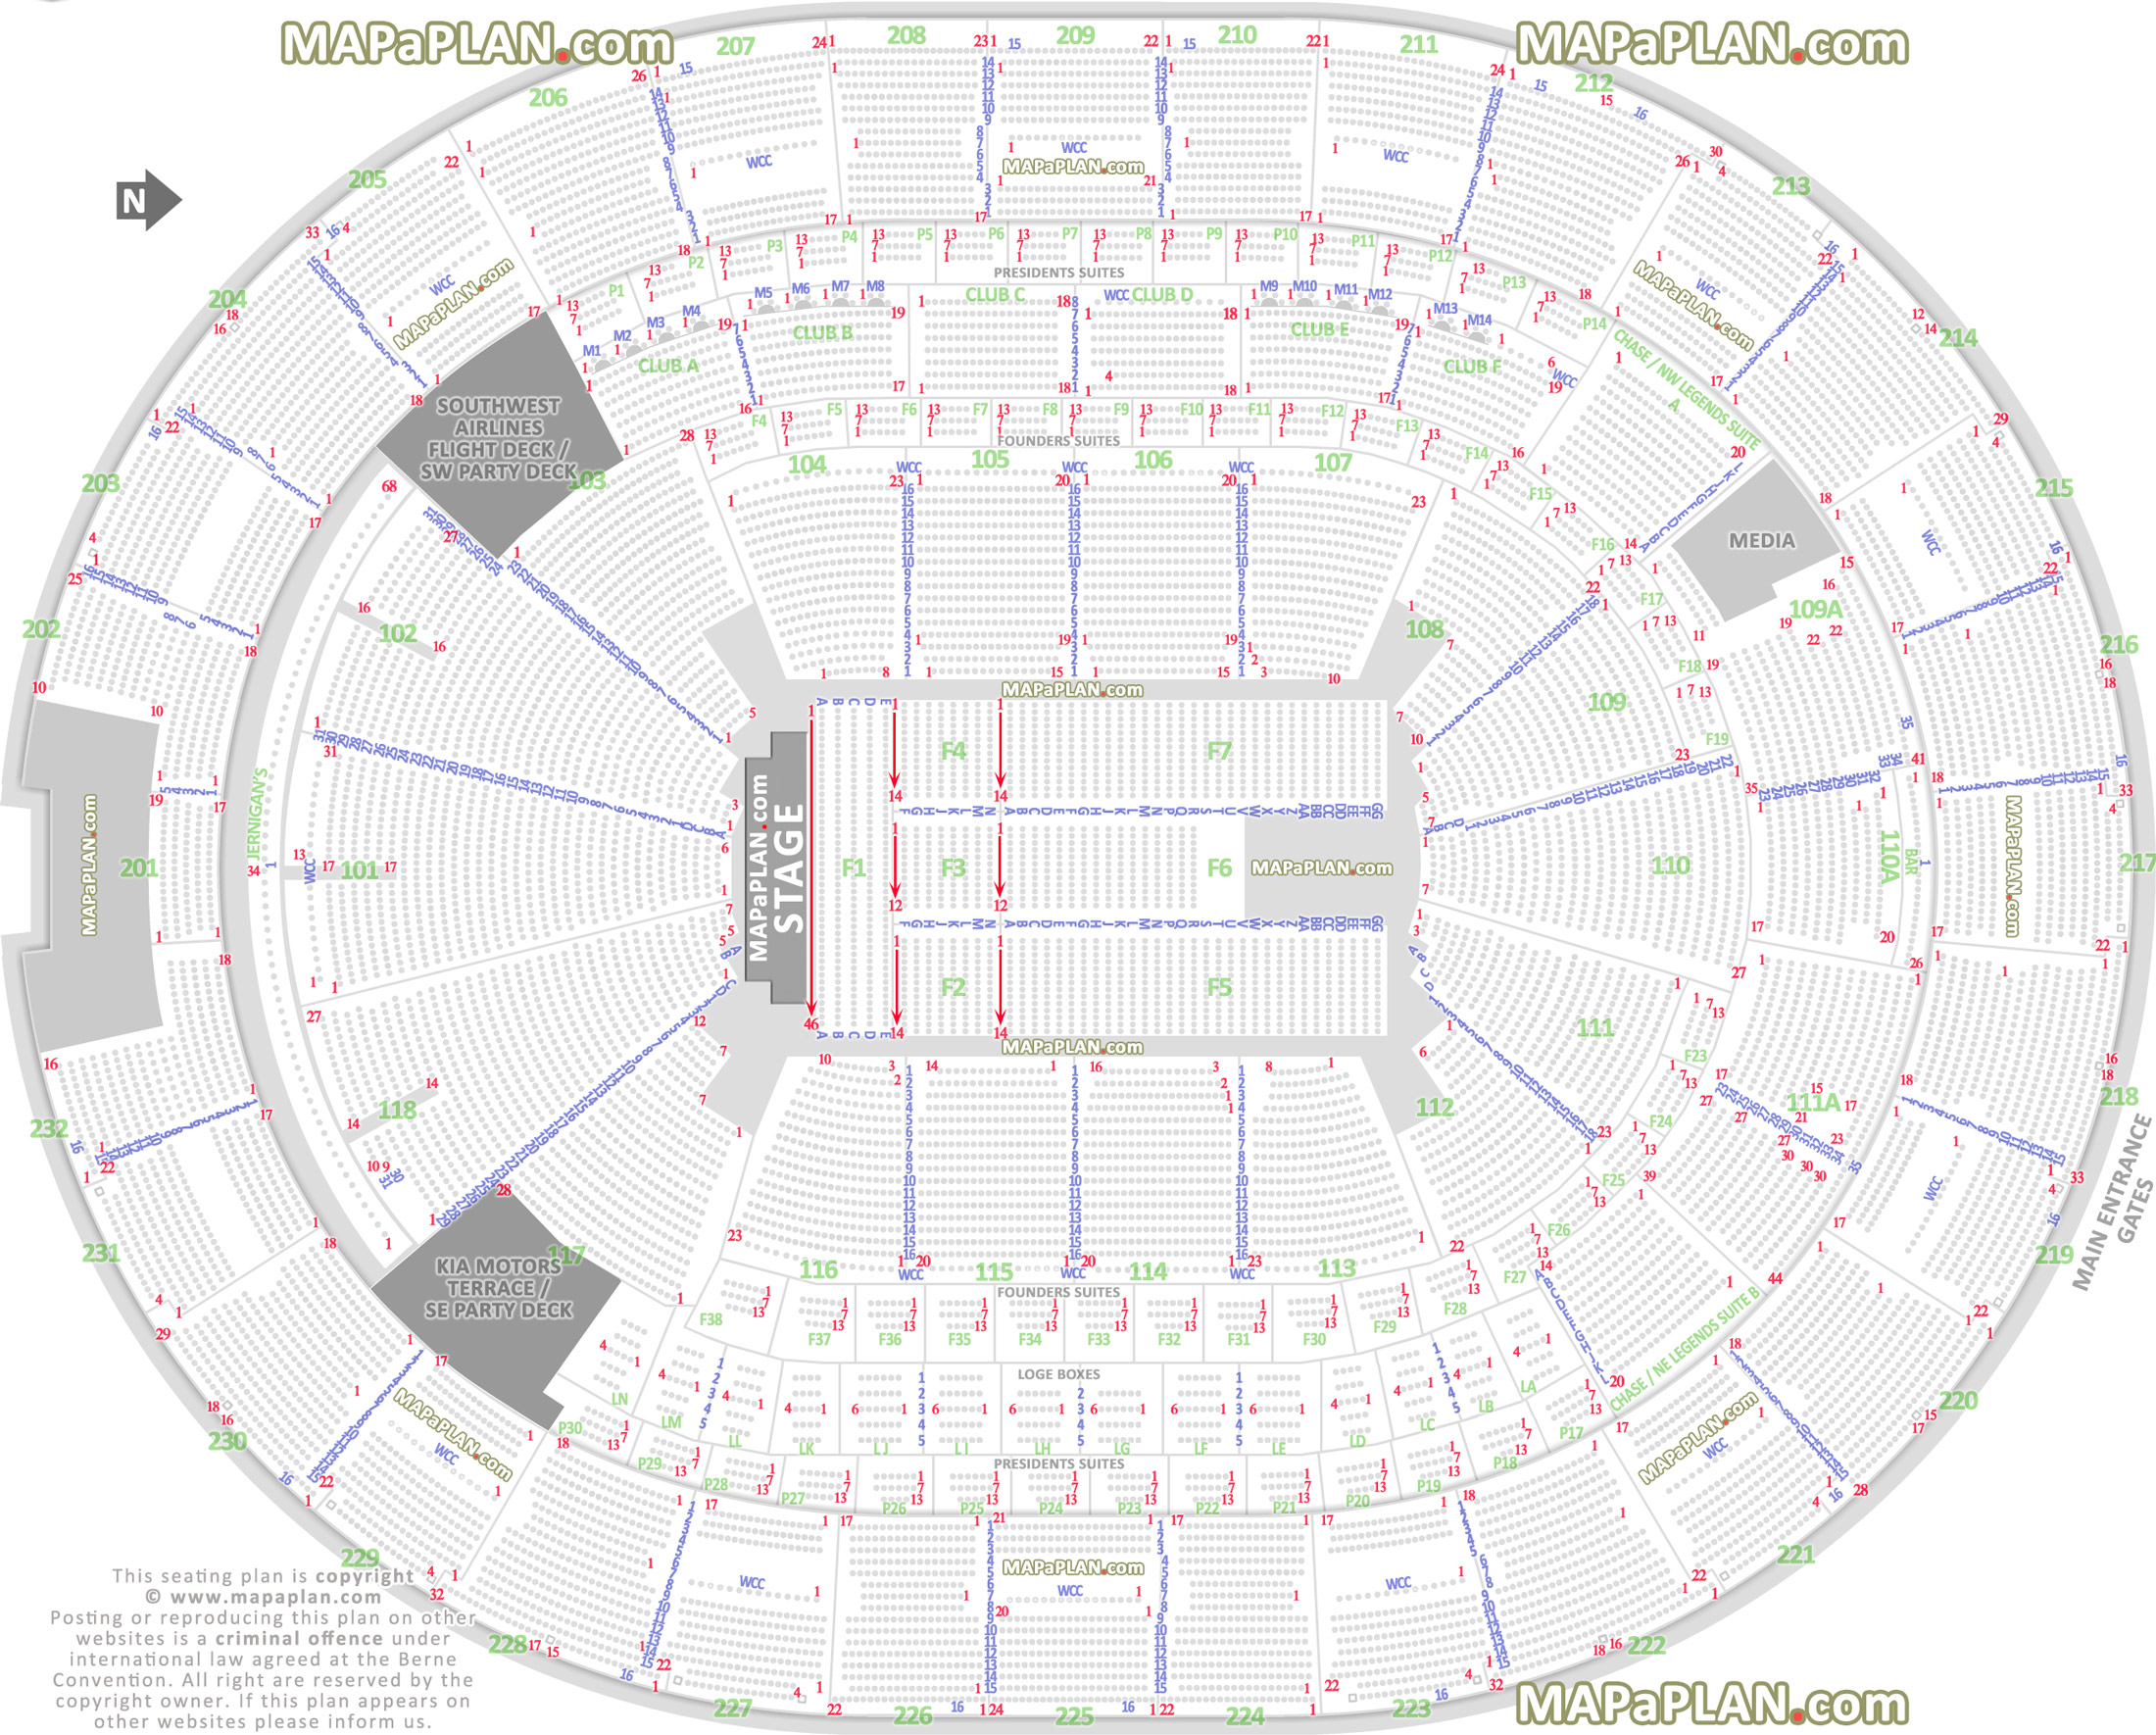 Orlando Amway Center Detailed seat & row numbers end stage concert